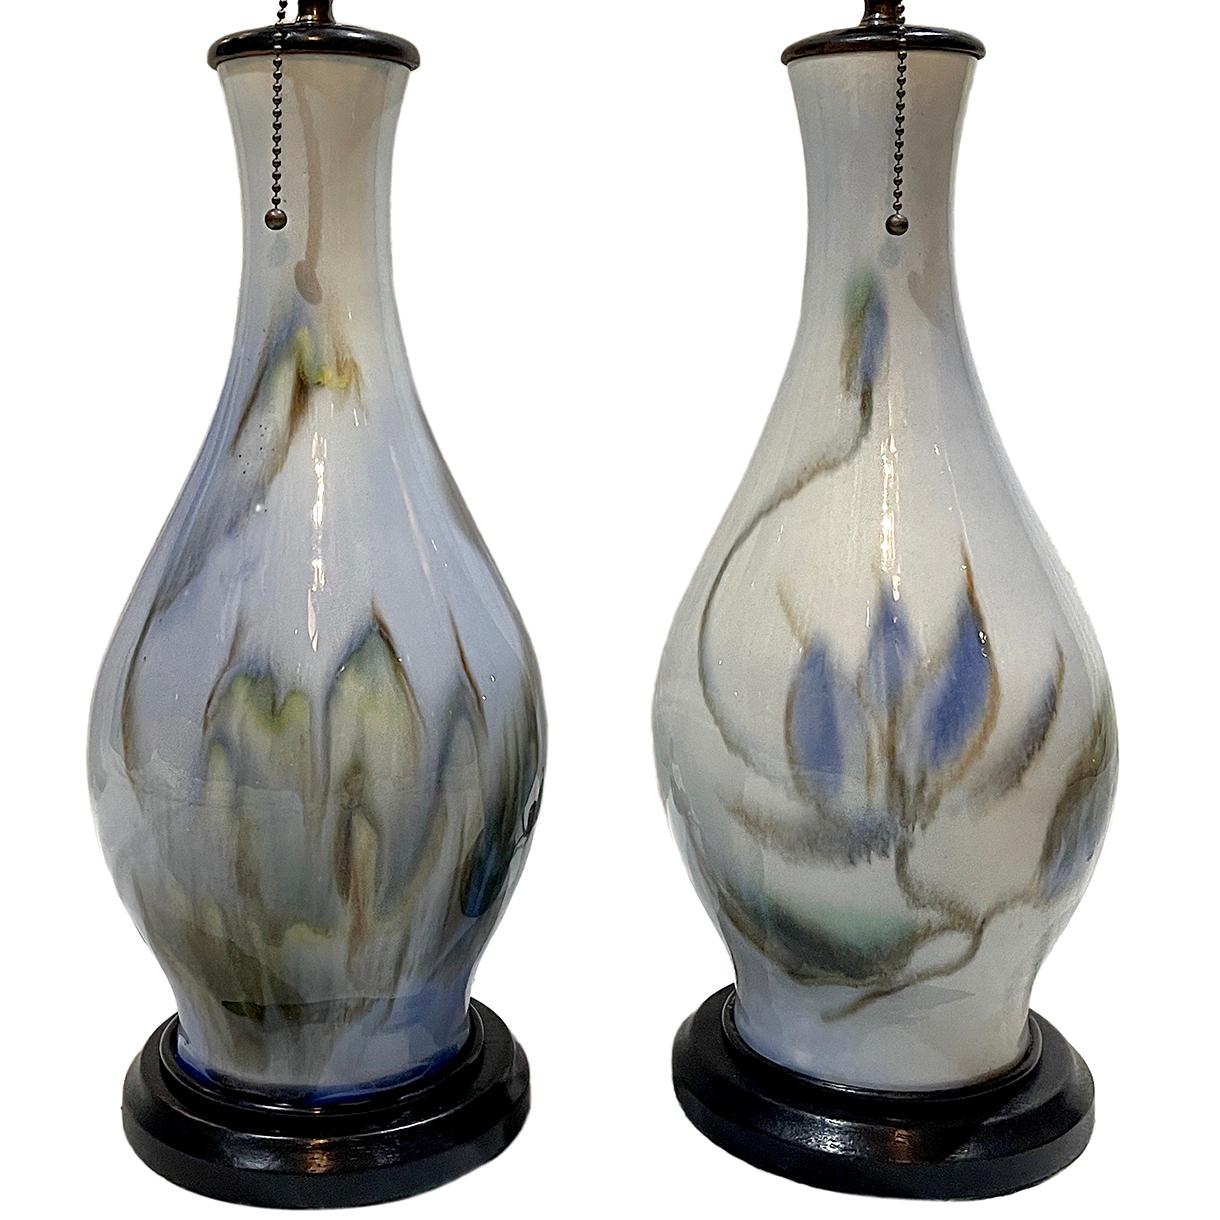 A pair of circa 1950s blue porcelain table lamps with ebonized bases.

Measurements: 
Height of body 16?
Diameter at widest 8